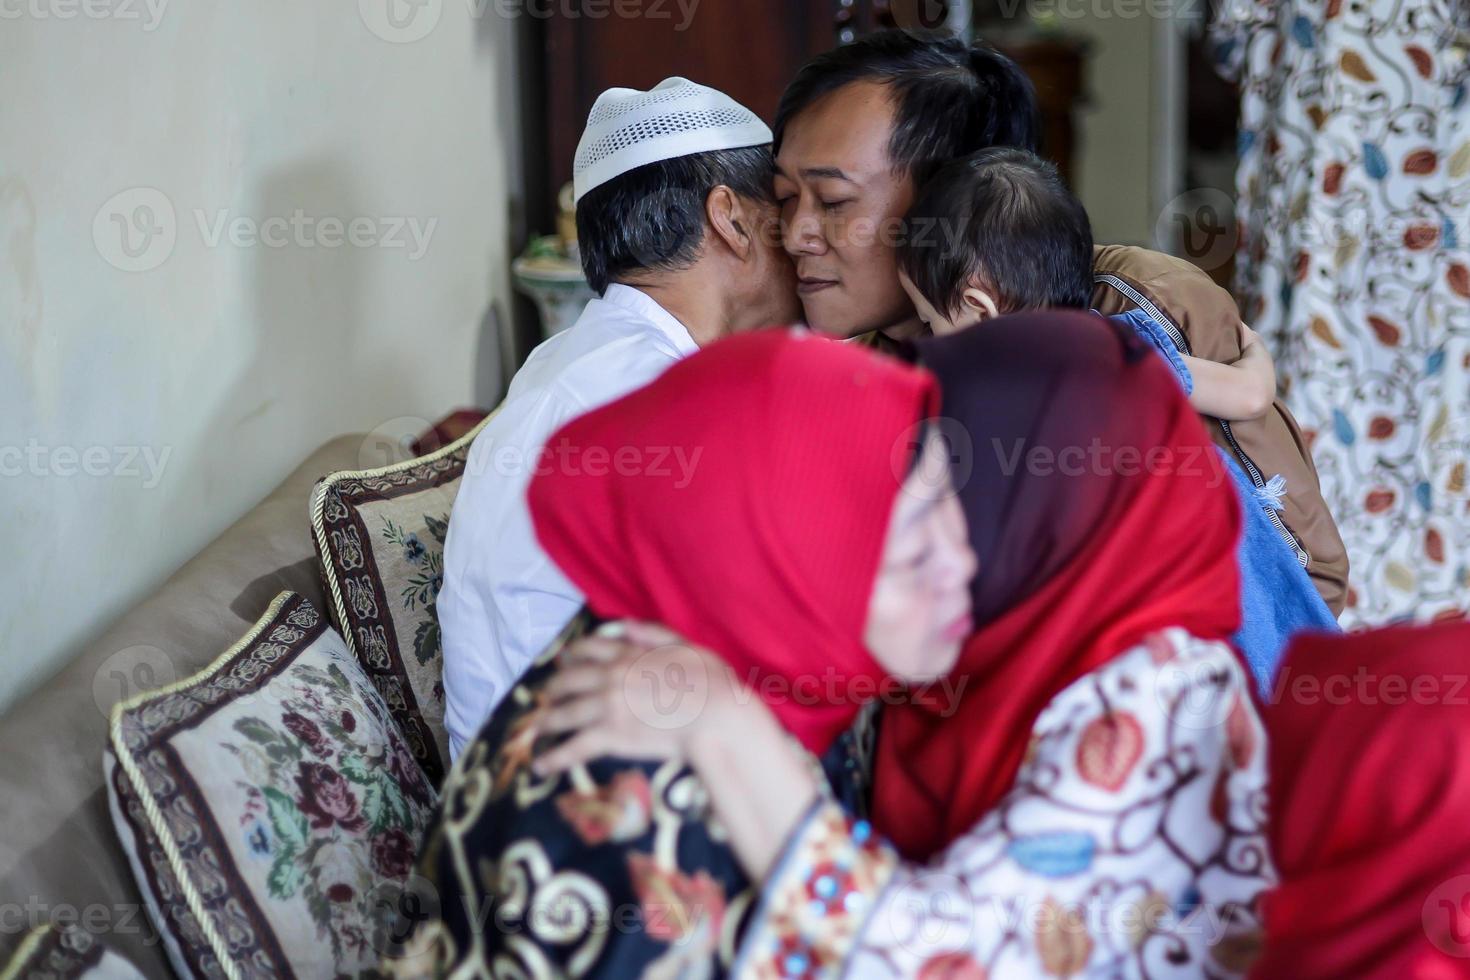 Lebaran homecoming in his hometown greet each other apologizing during the Eid. Family hug each other, parents with their children. photo